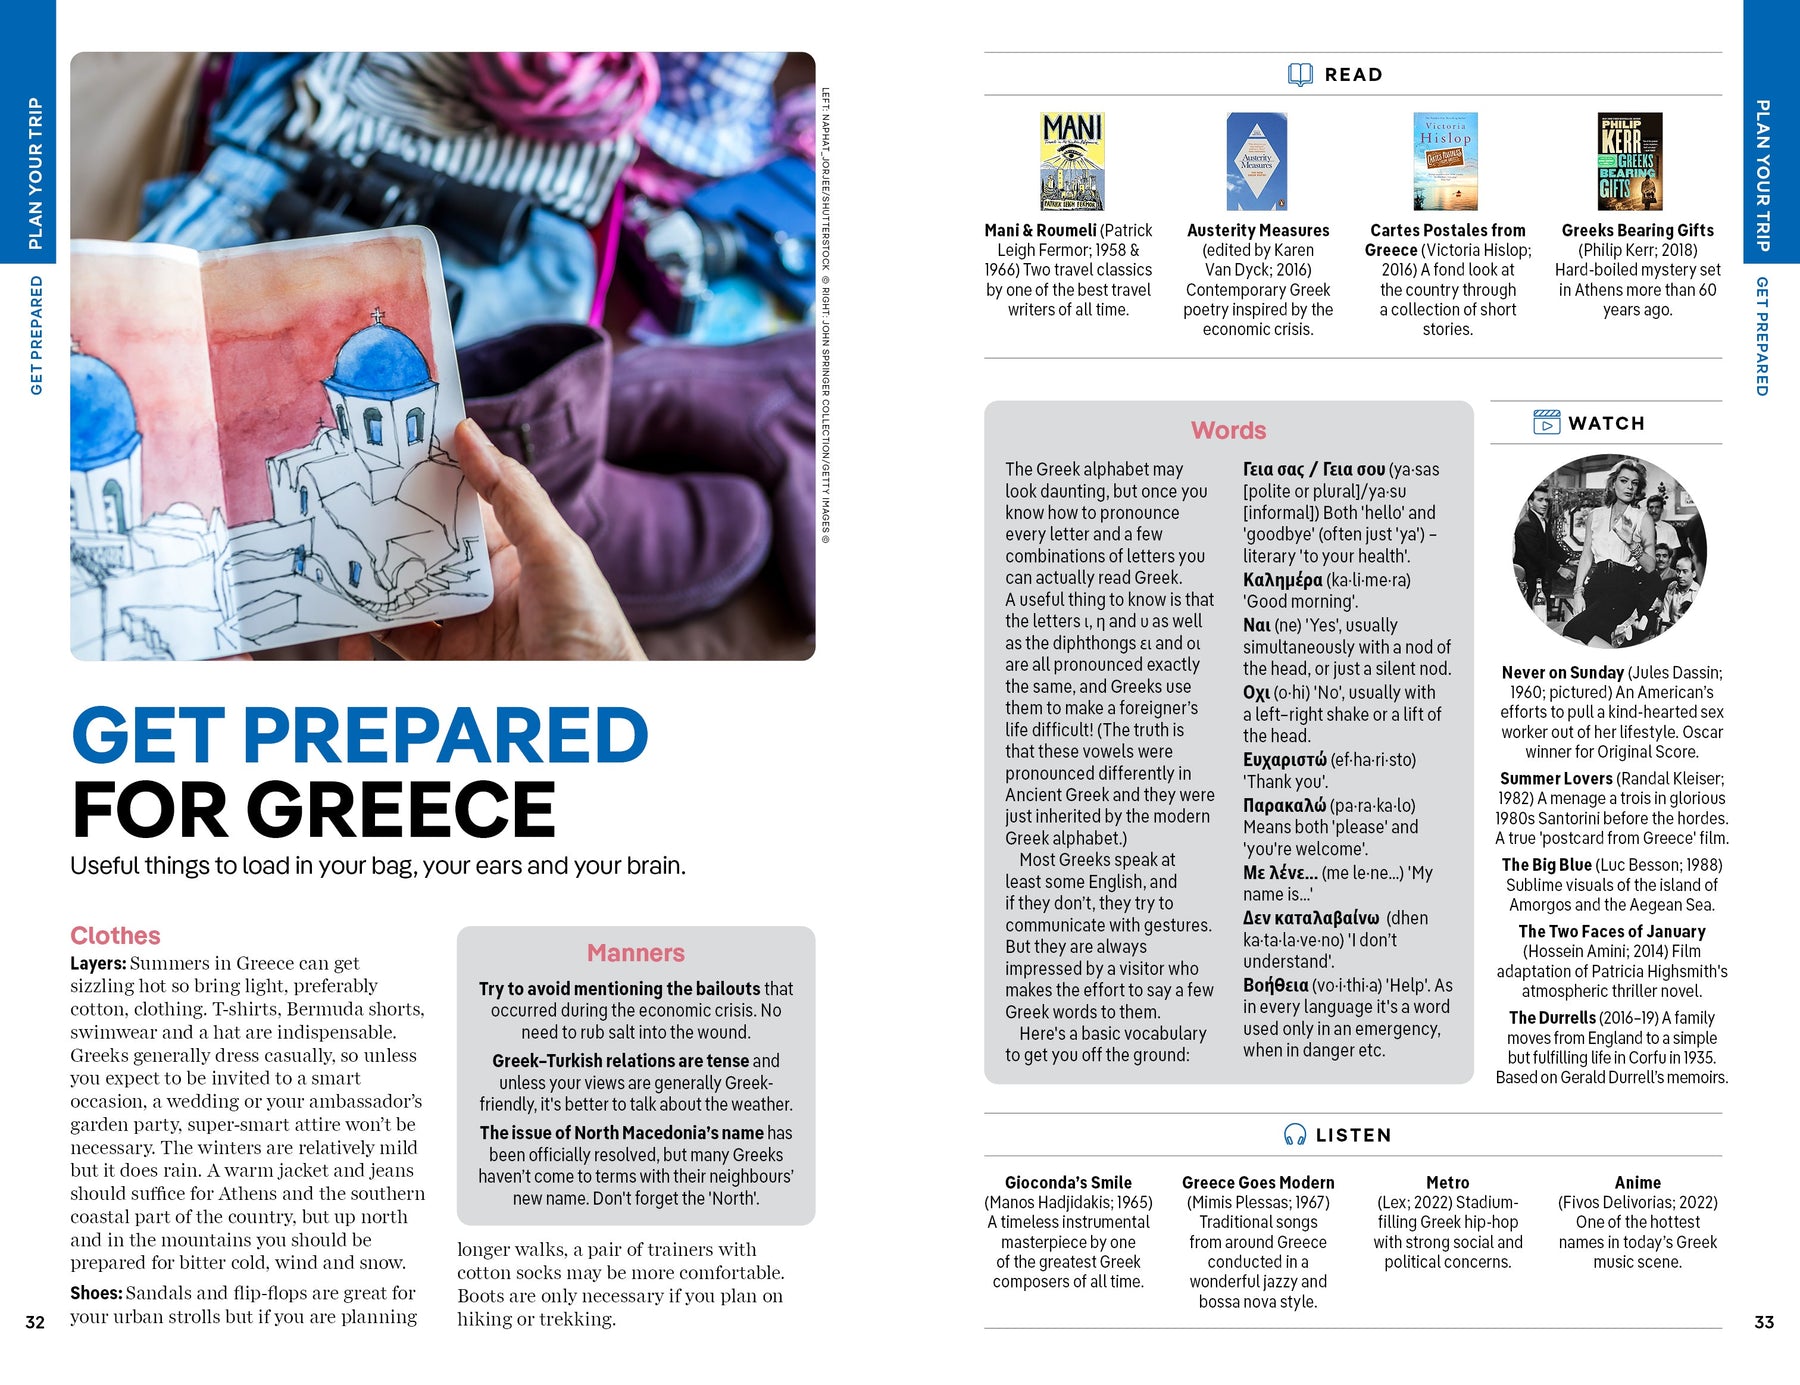 Greece preview